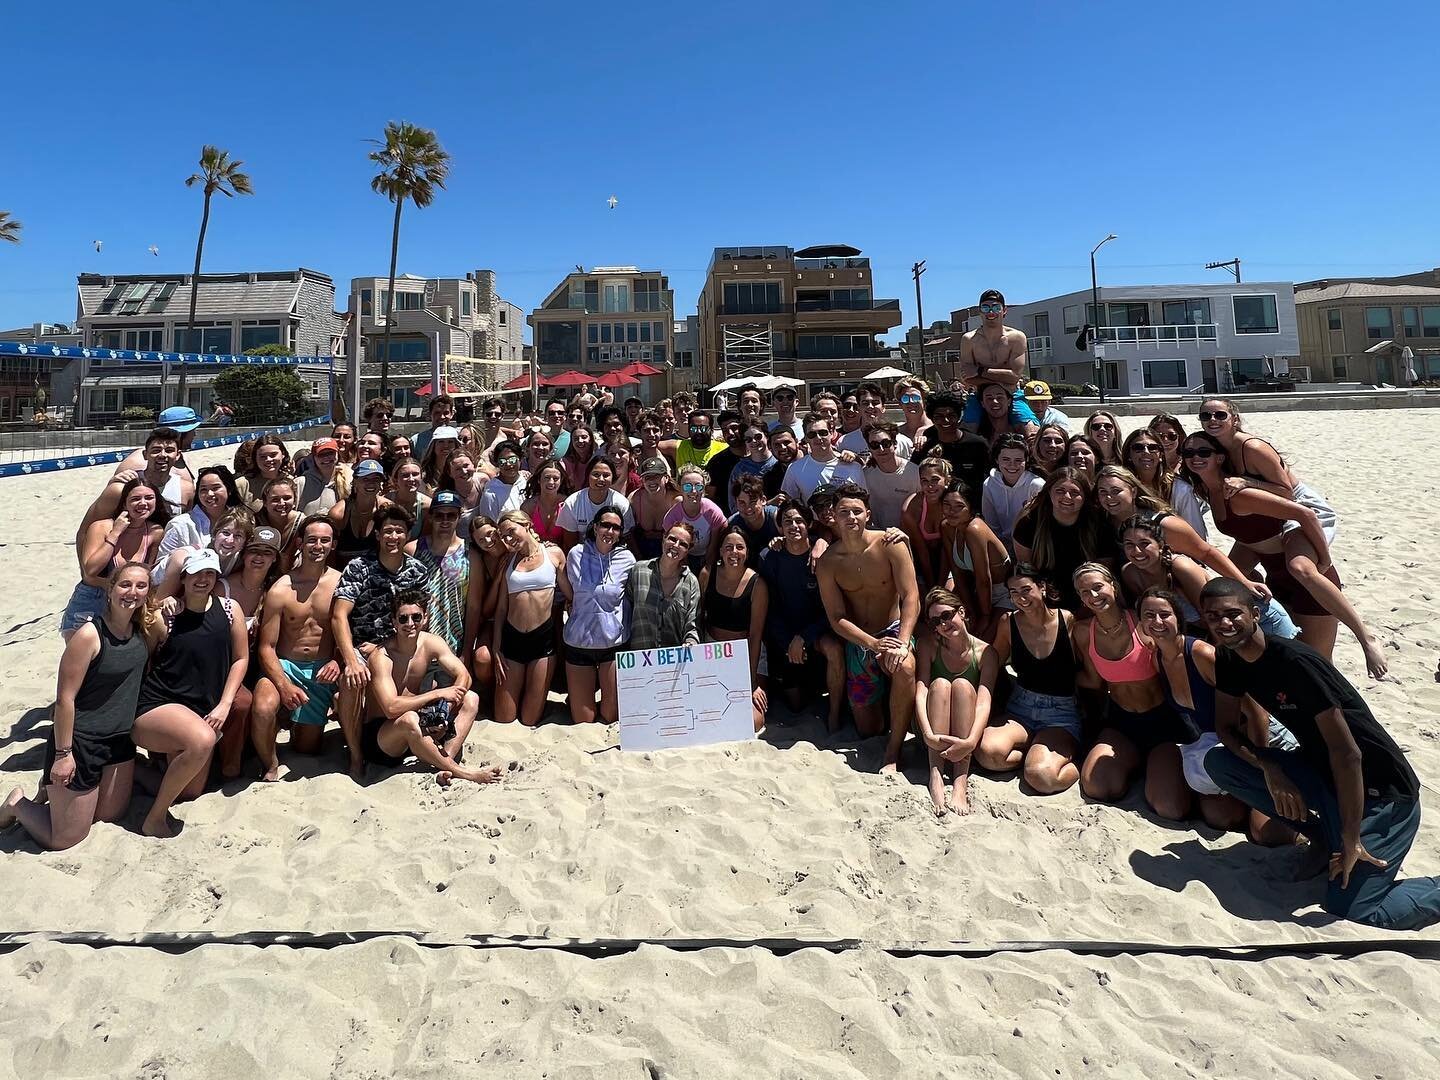 Had a great Beach BBQ exchange and volleyball tournament with the wonderful @usdkappadelta yesterday!!